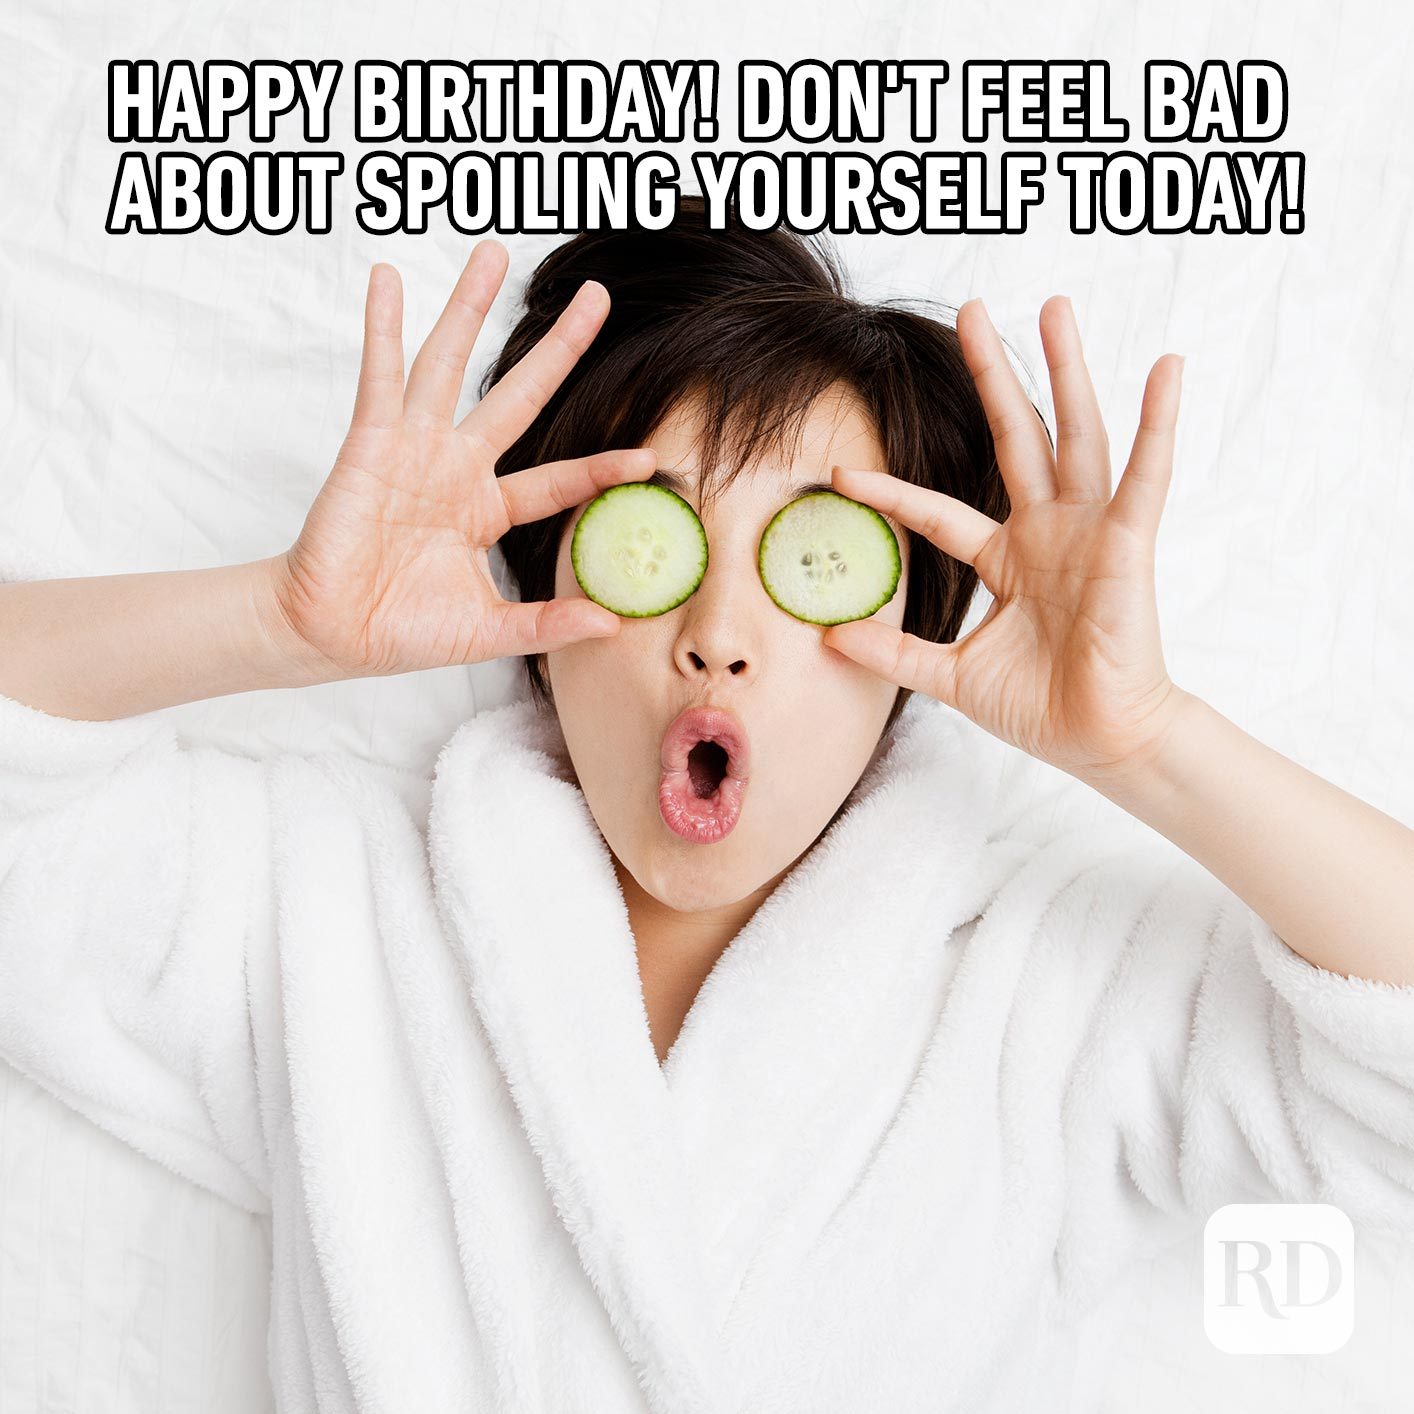 Happy Birthday! Don't feel bad about spoiling yourself today!